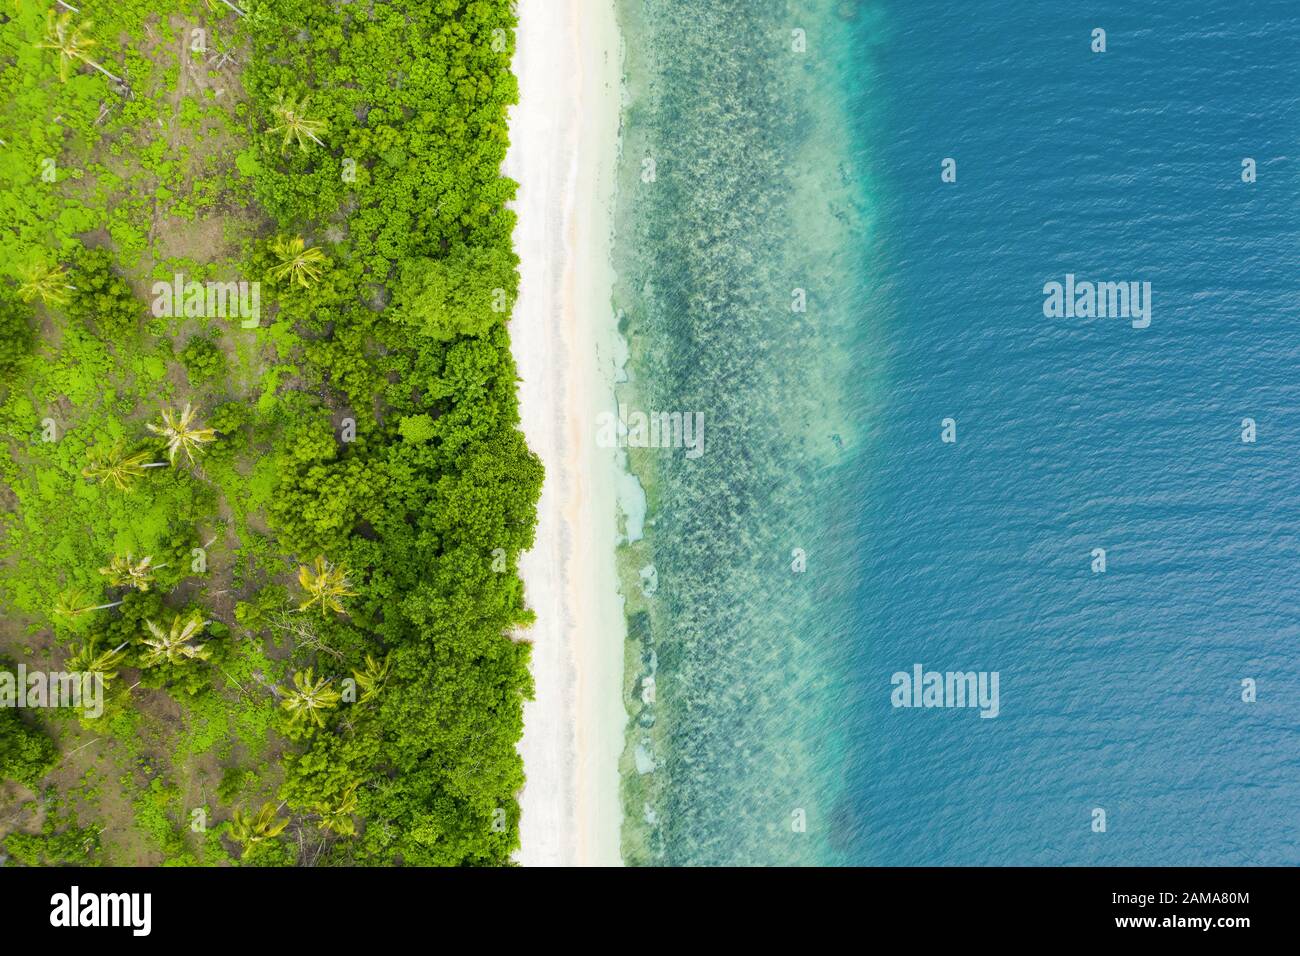 View from above, stunning aerial view of a green coast with coconut palm trees and a beautiful white sand beach bathed by a turquoise sea. Stock Photo